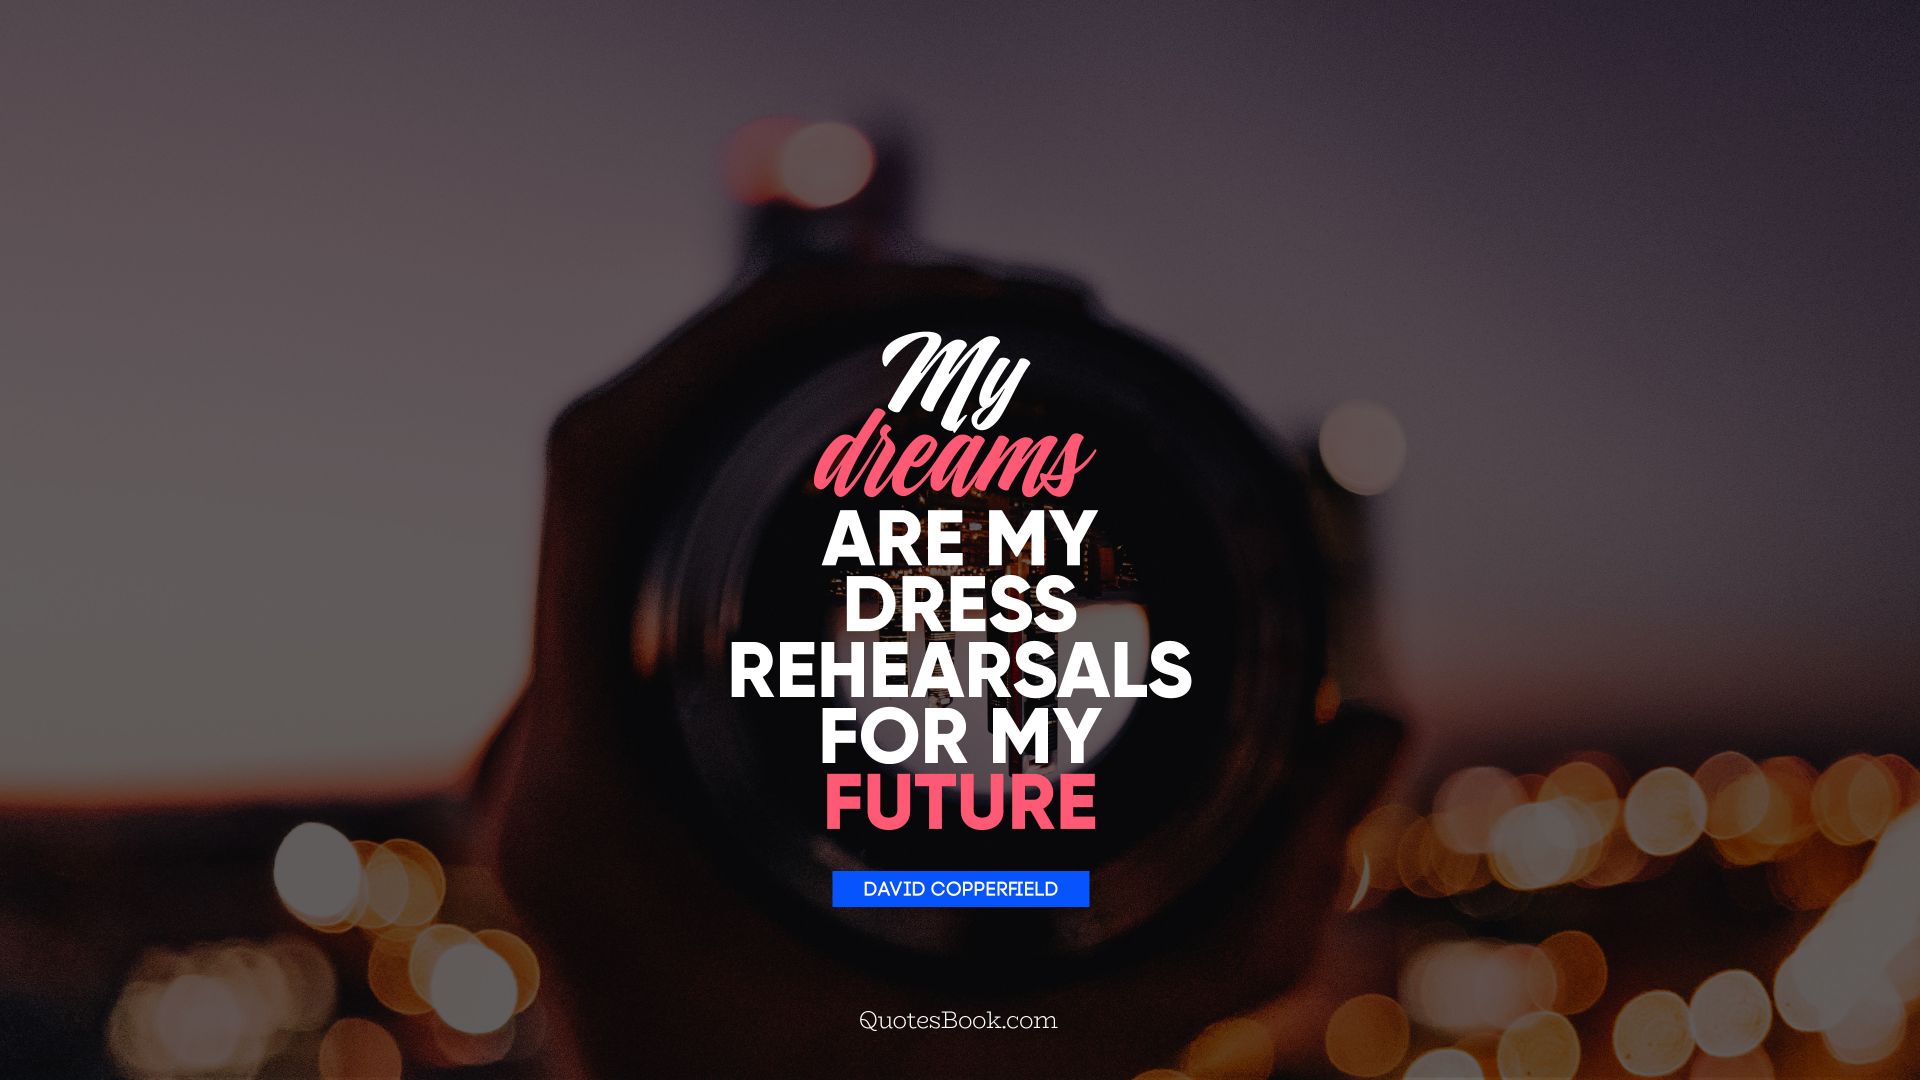 My dreams are my dress rehearsals for my future. - Quote by David Copperfield